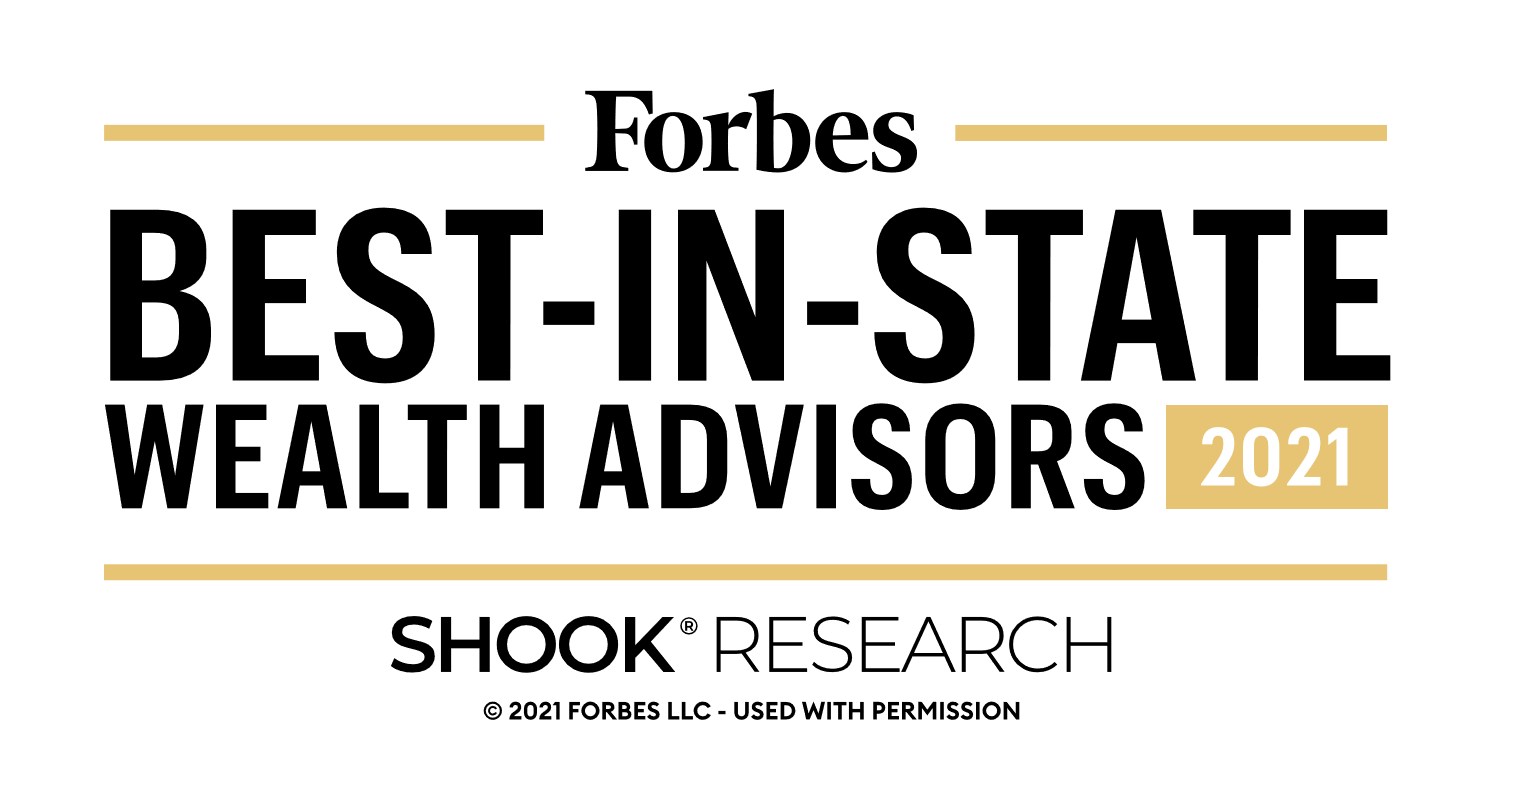 Forbes best in state wealth advisors